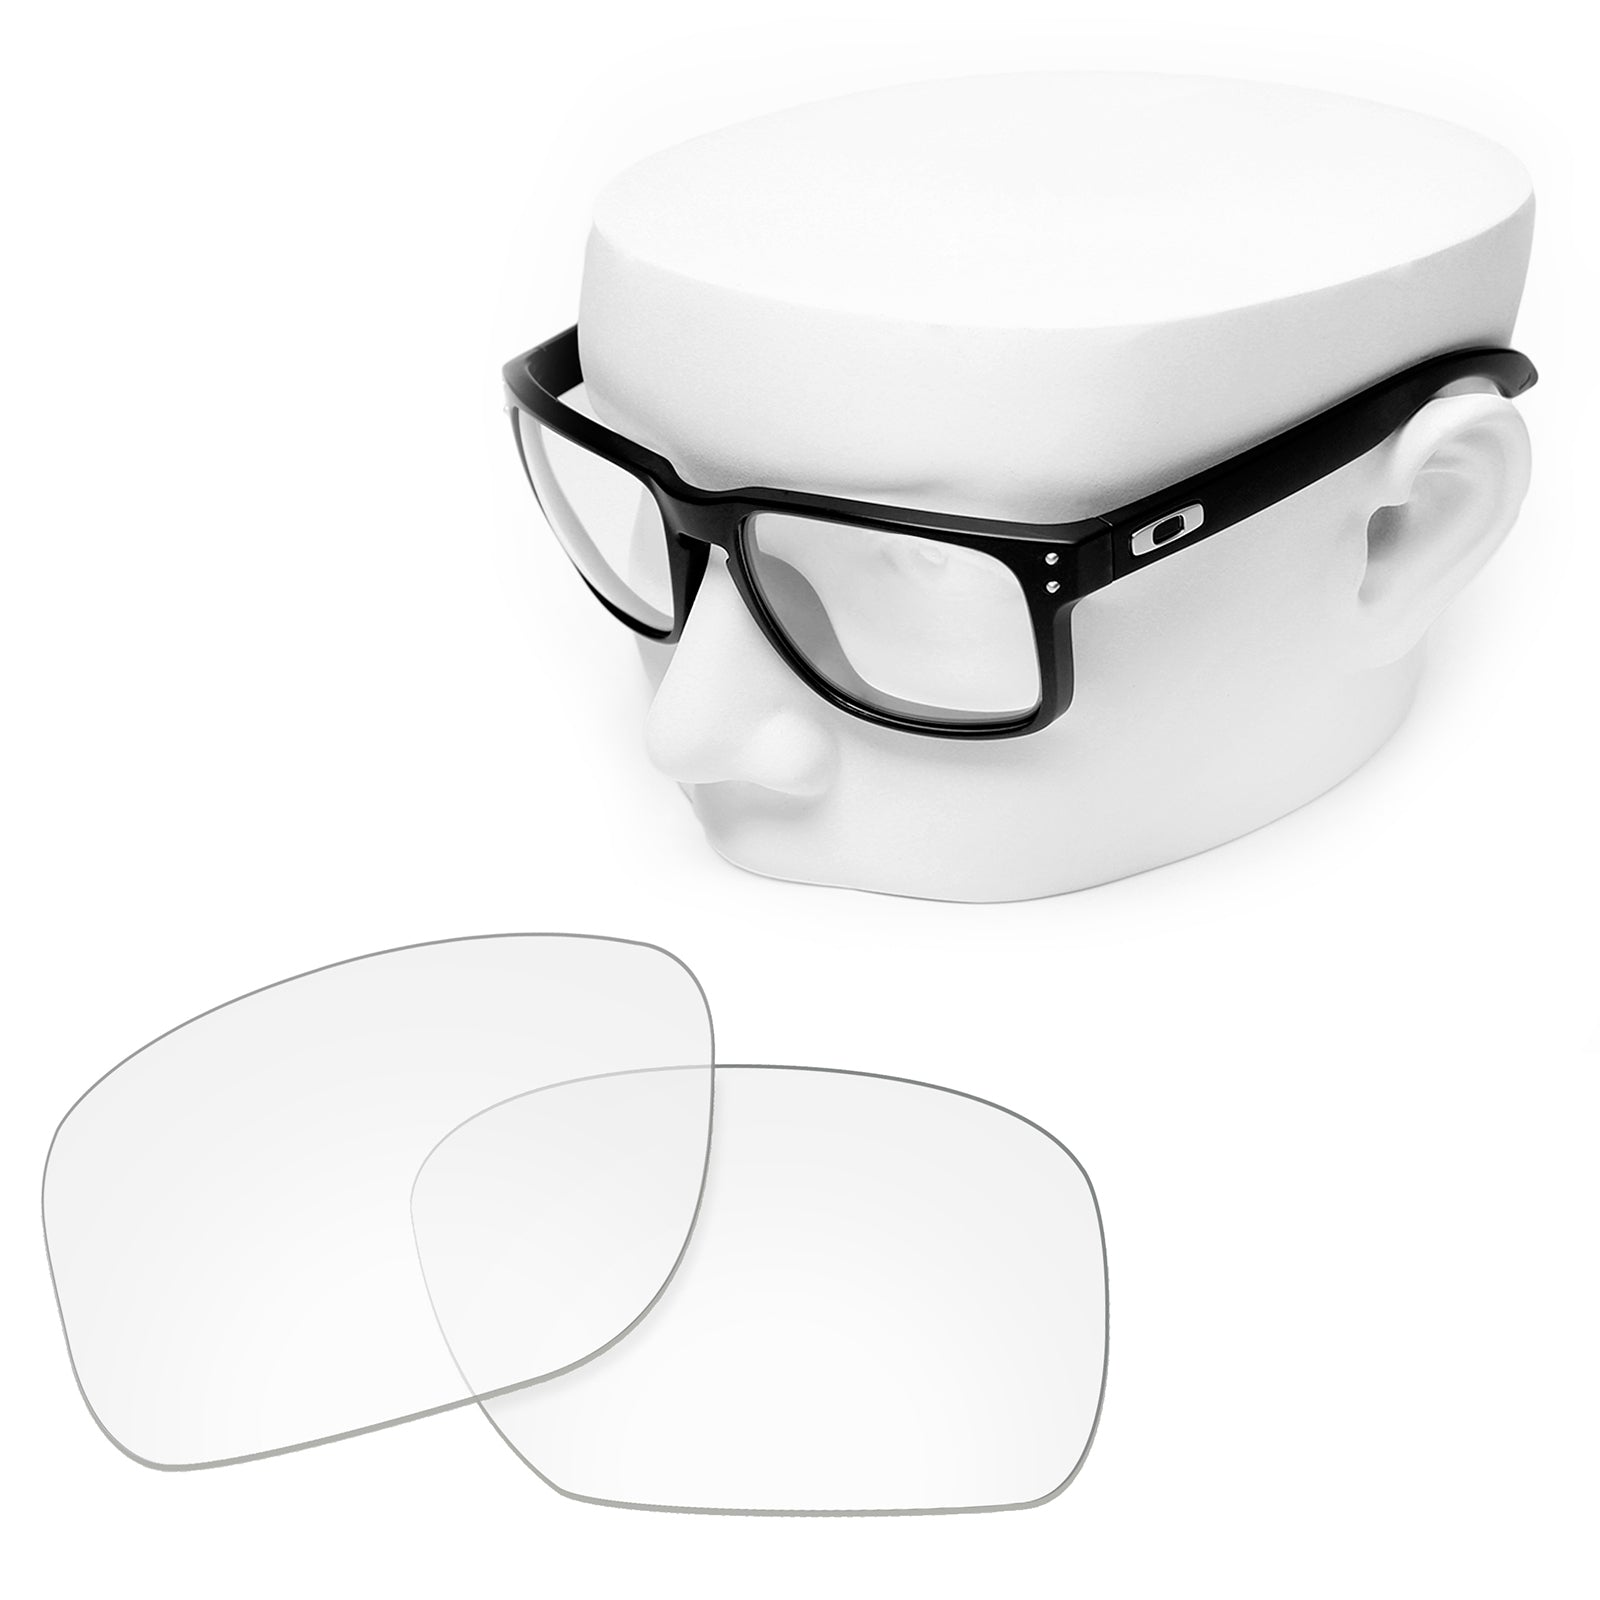 OOWLIT Replacement Lenses for Oakley Holbrook Sunglass - HD Clear